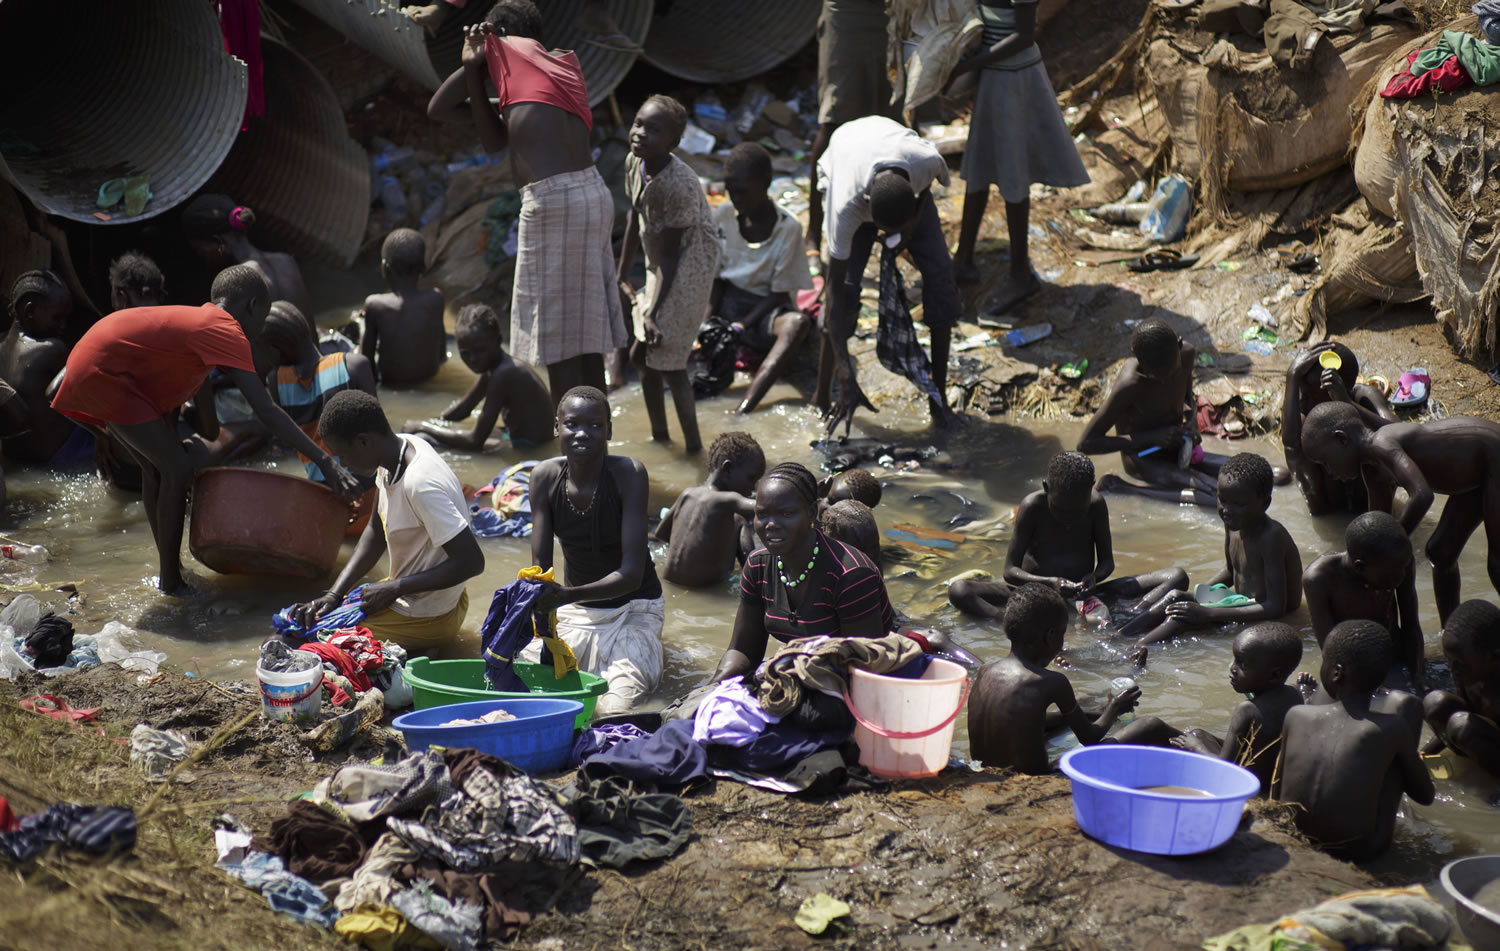 Associated Press file photos
Displaced people bathe and wash clothes Dec. 27, 2013, in a stream inside a United Nations compound in Juba, South Sudan, that had become home to thousands of refugees from fighting. One year after mass violence broke out in South Sudan, battles between government forces and rebel fighters continue, and aid officials say the international community must help residents stave off mass hunger.